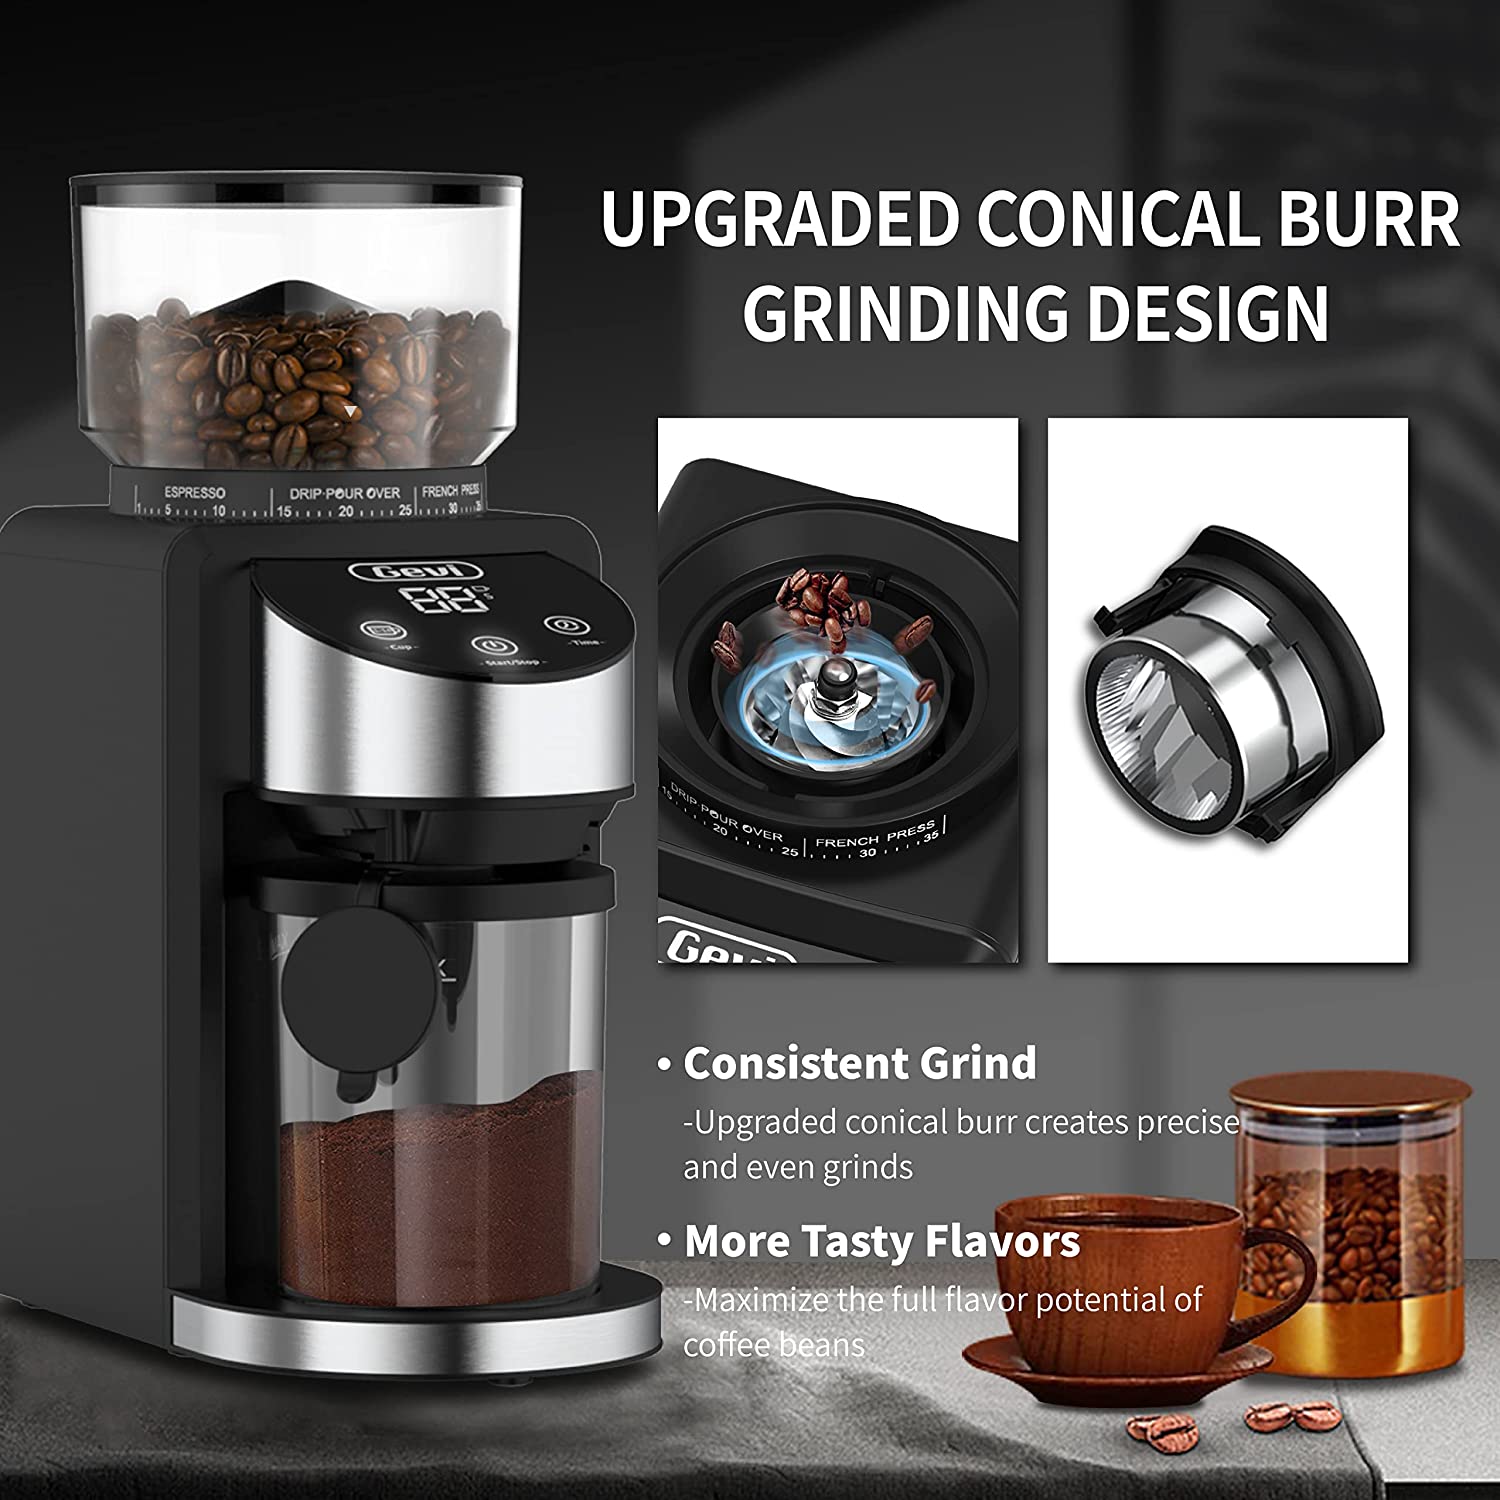 Sboly Electric Burr Coffee Grinder with 18 Grind Settings, Adjustable Burr Mill Coffee Bean Grinder for Espresso, Drip Coffee, French Press and